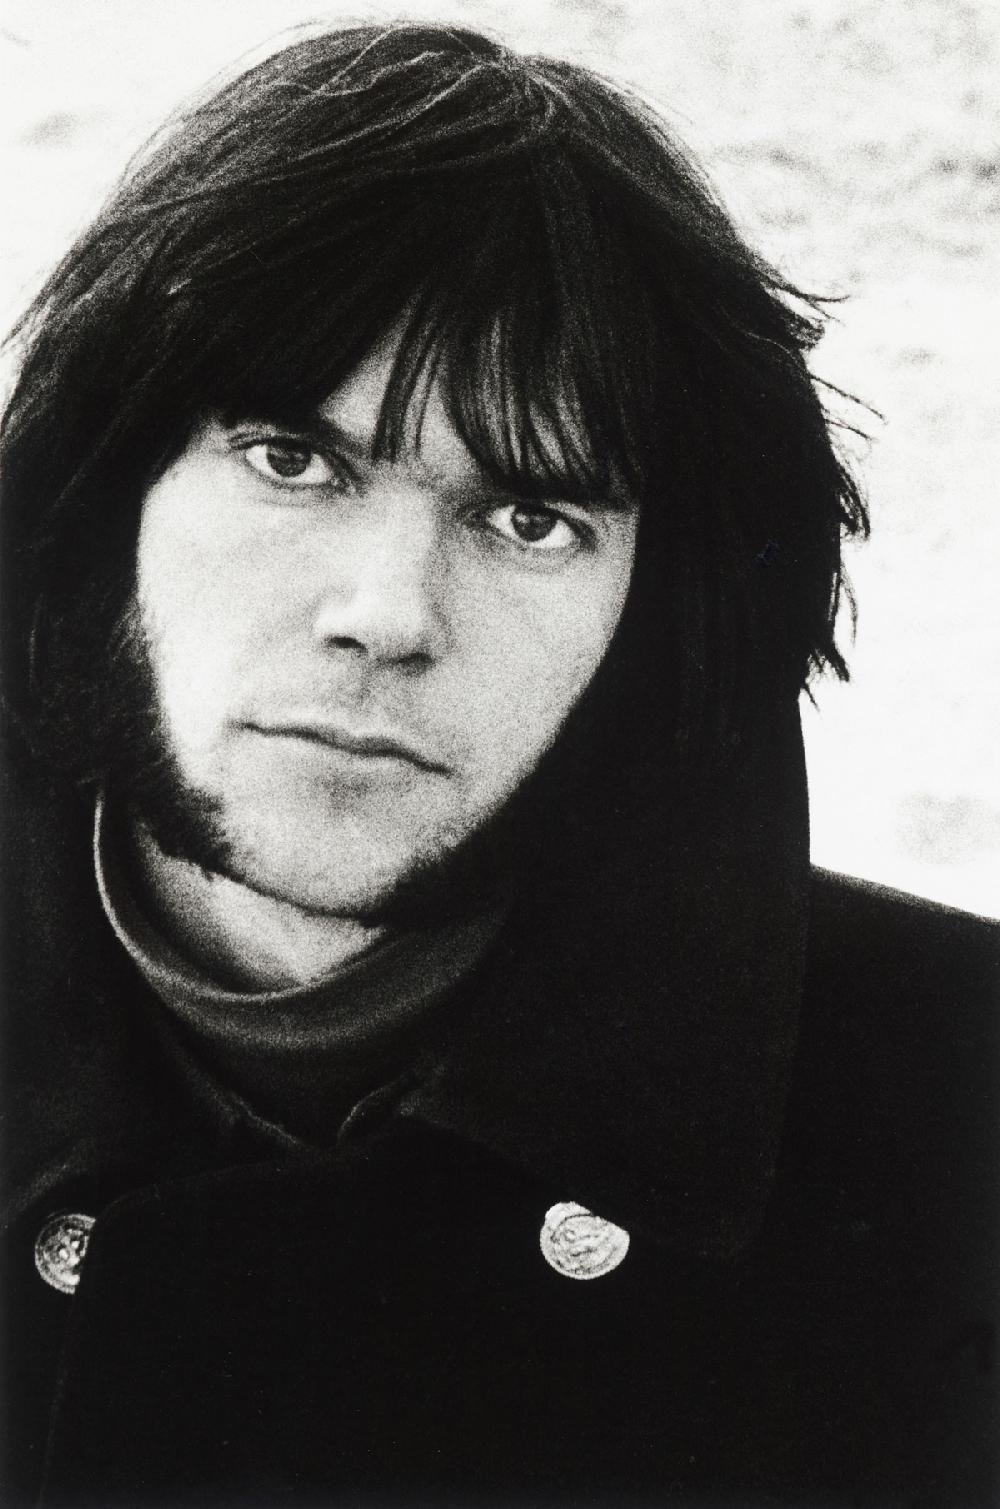 neil young - photo #22